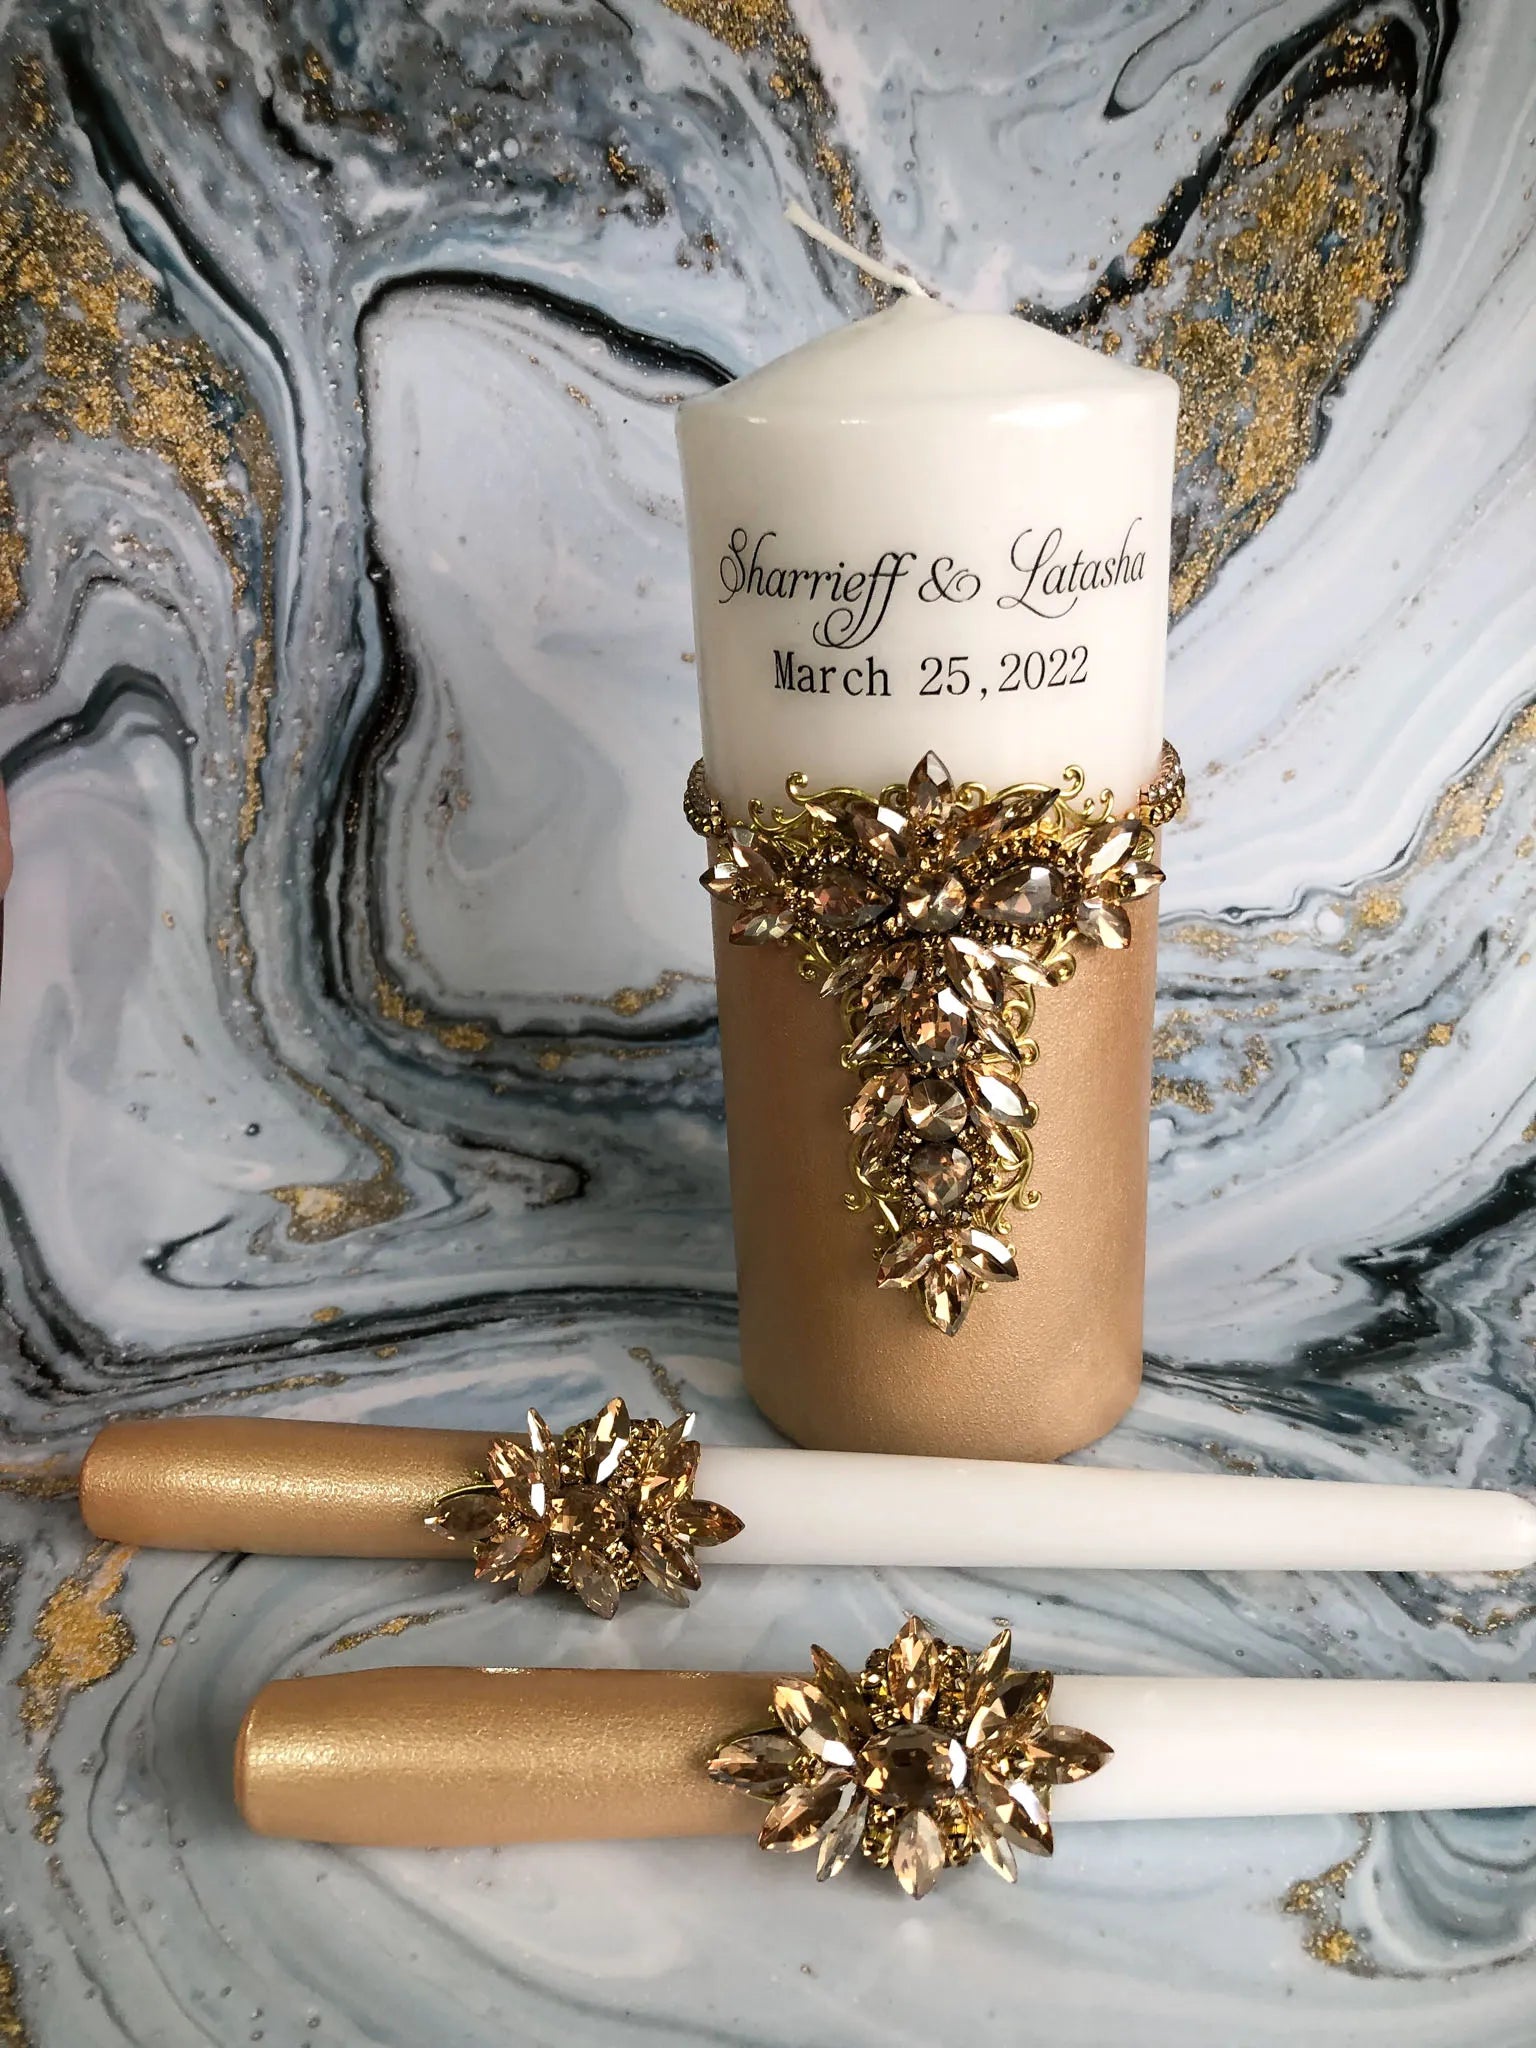 Gold crystal unity candles adorned with high-quality crystals